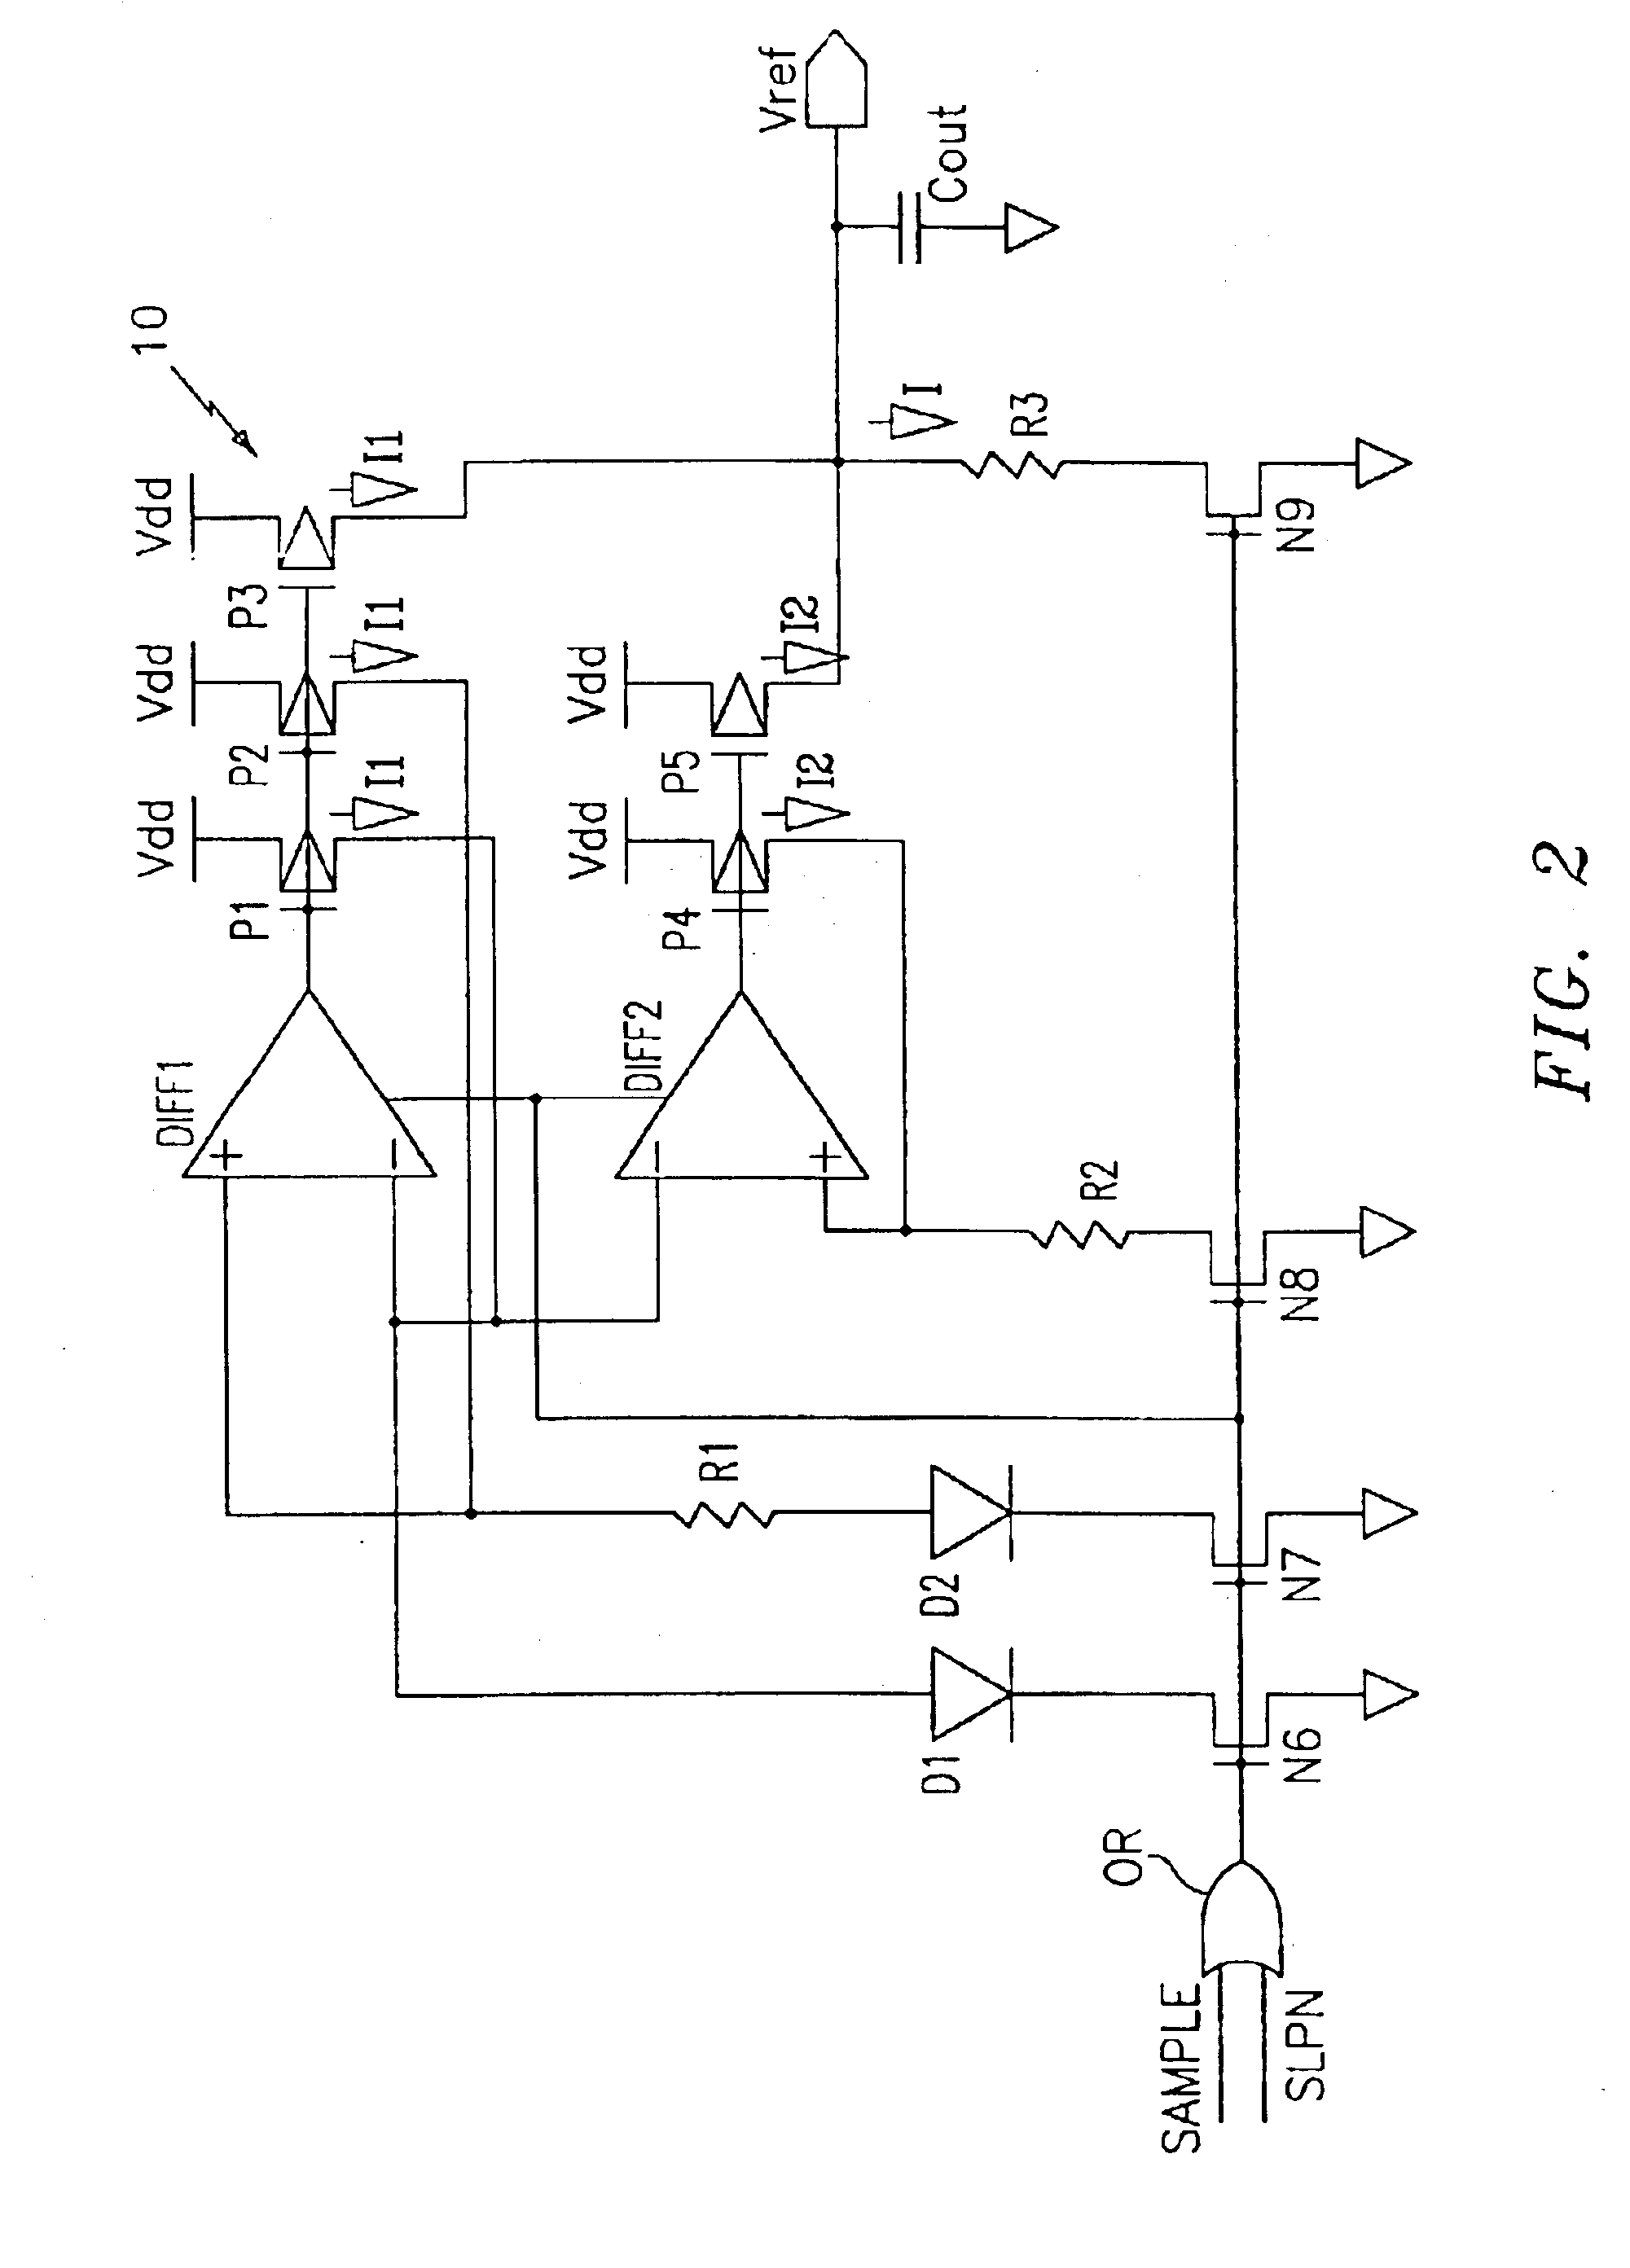 Low-power band-gap reference and temperature sensor circuit